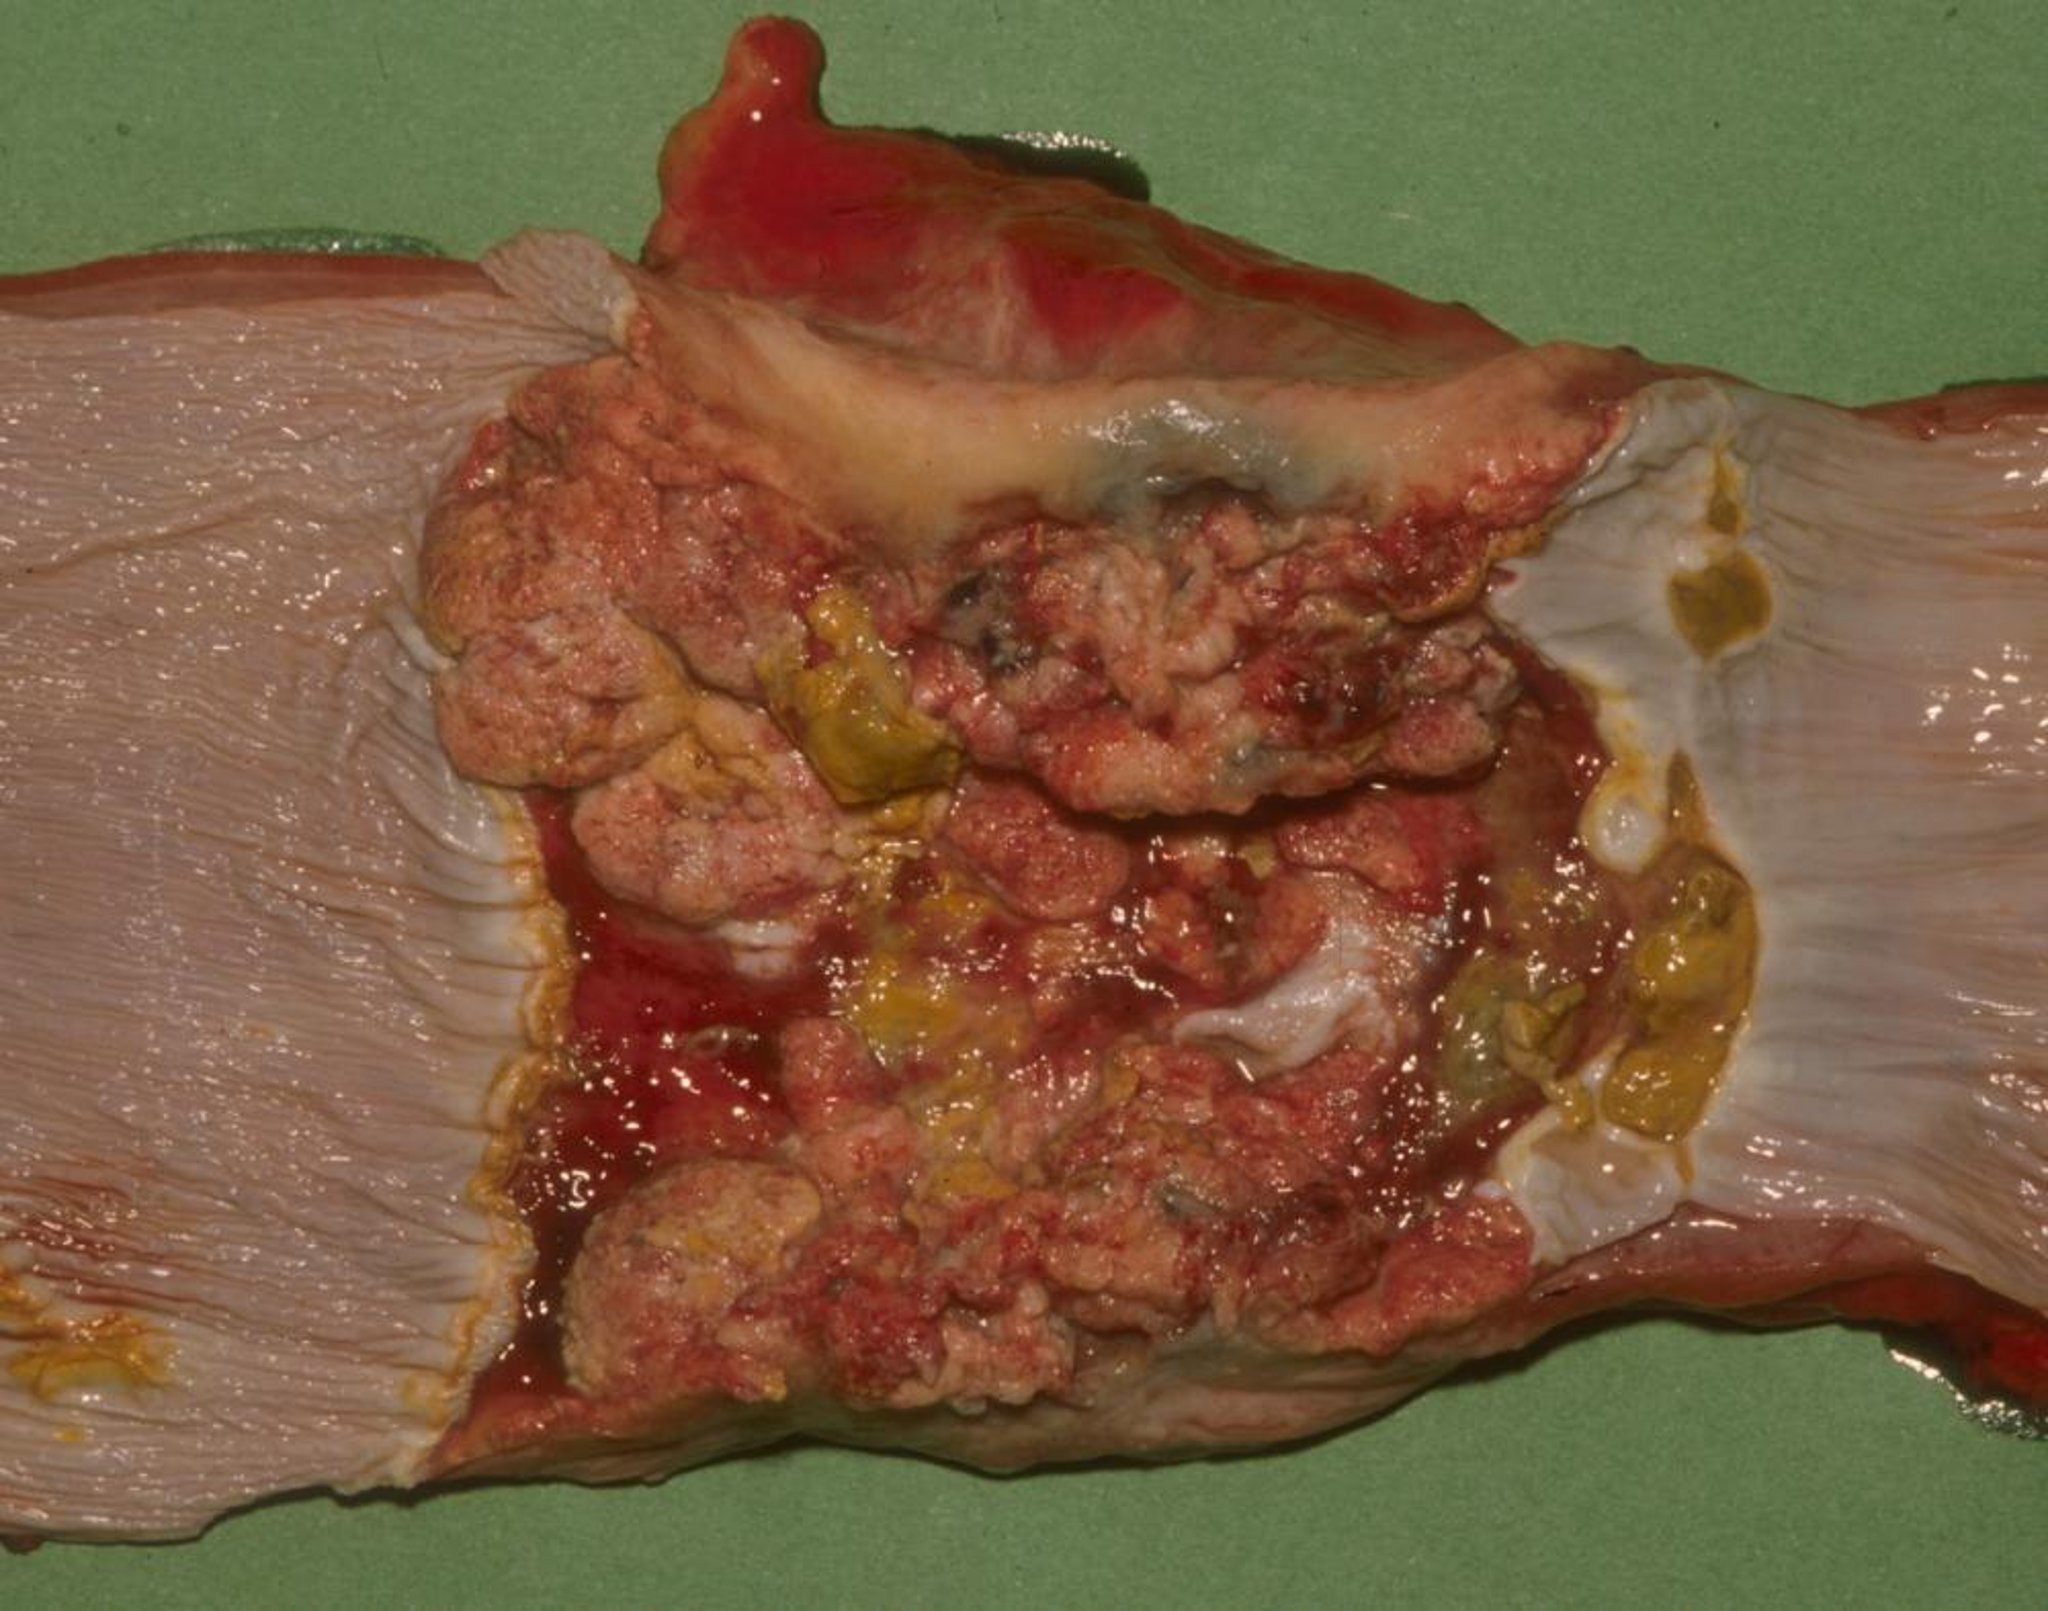 Esophageal squamous cell carcinoma, horse